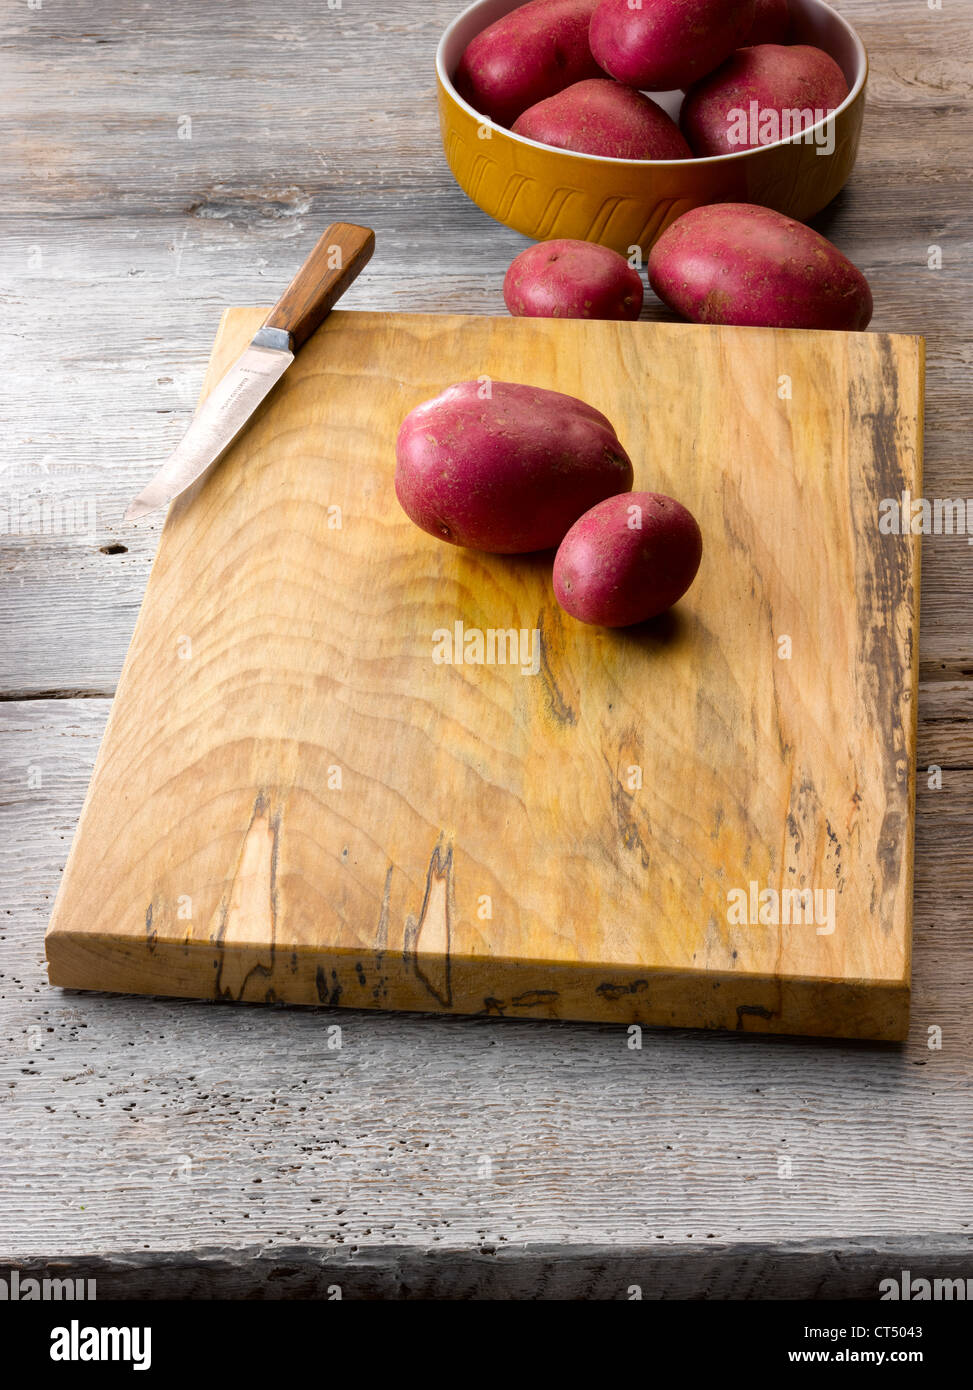 Rustic wood chopping board with raw potatoes Stock Photo